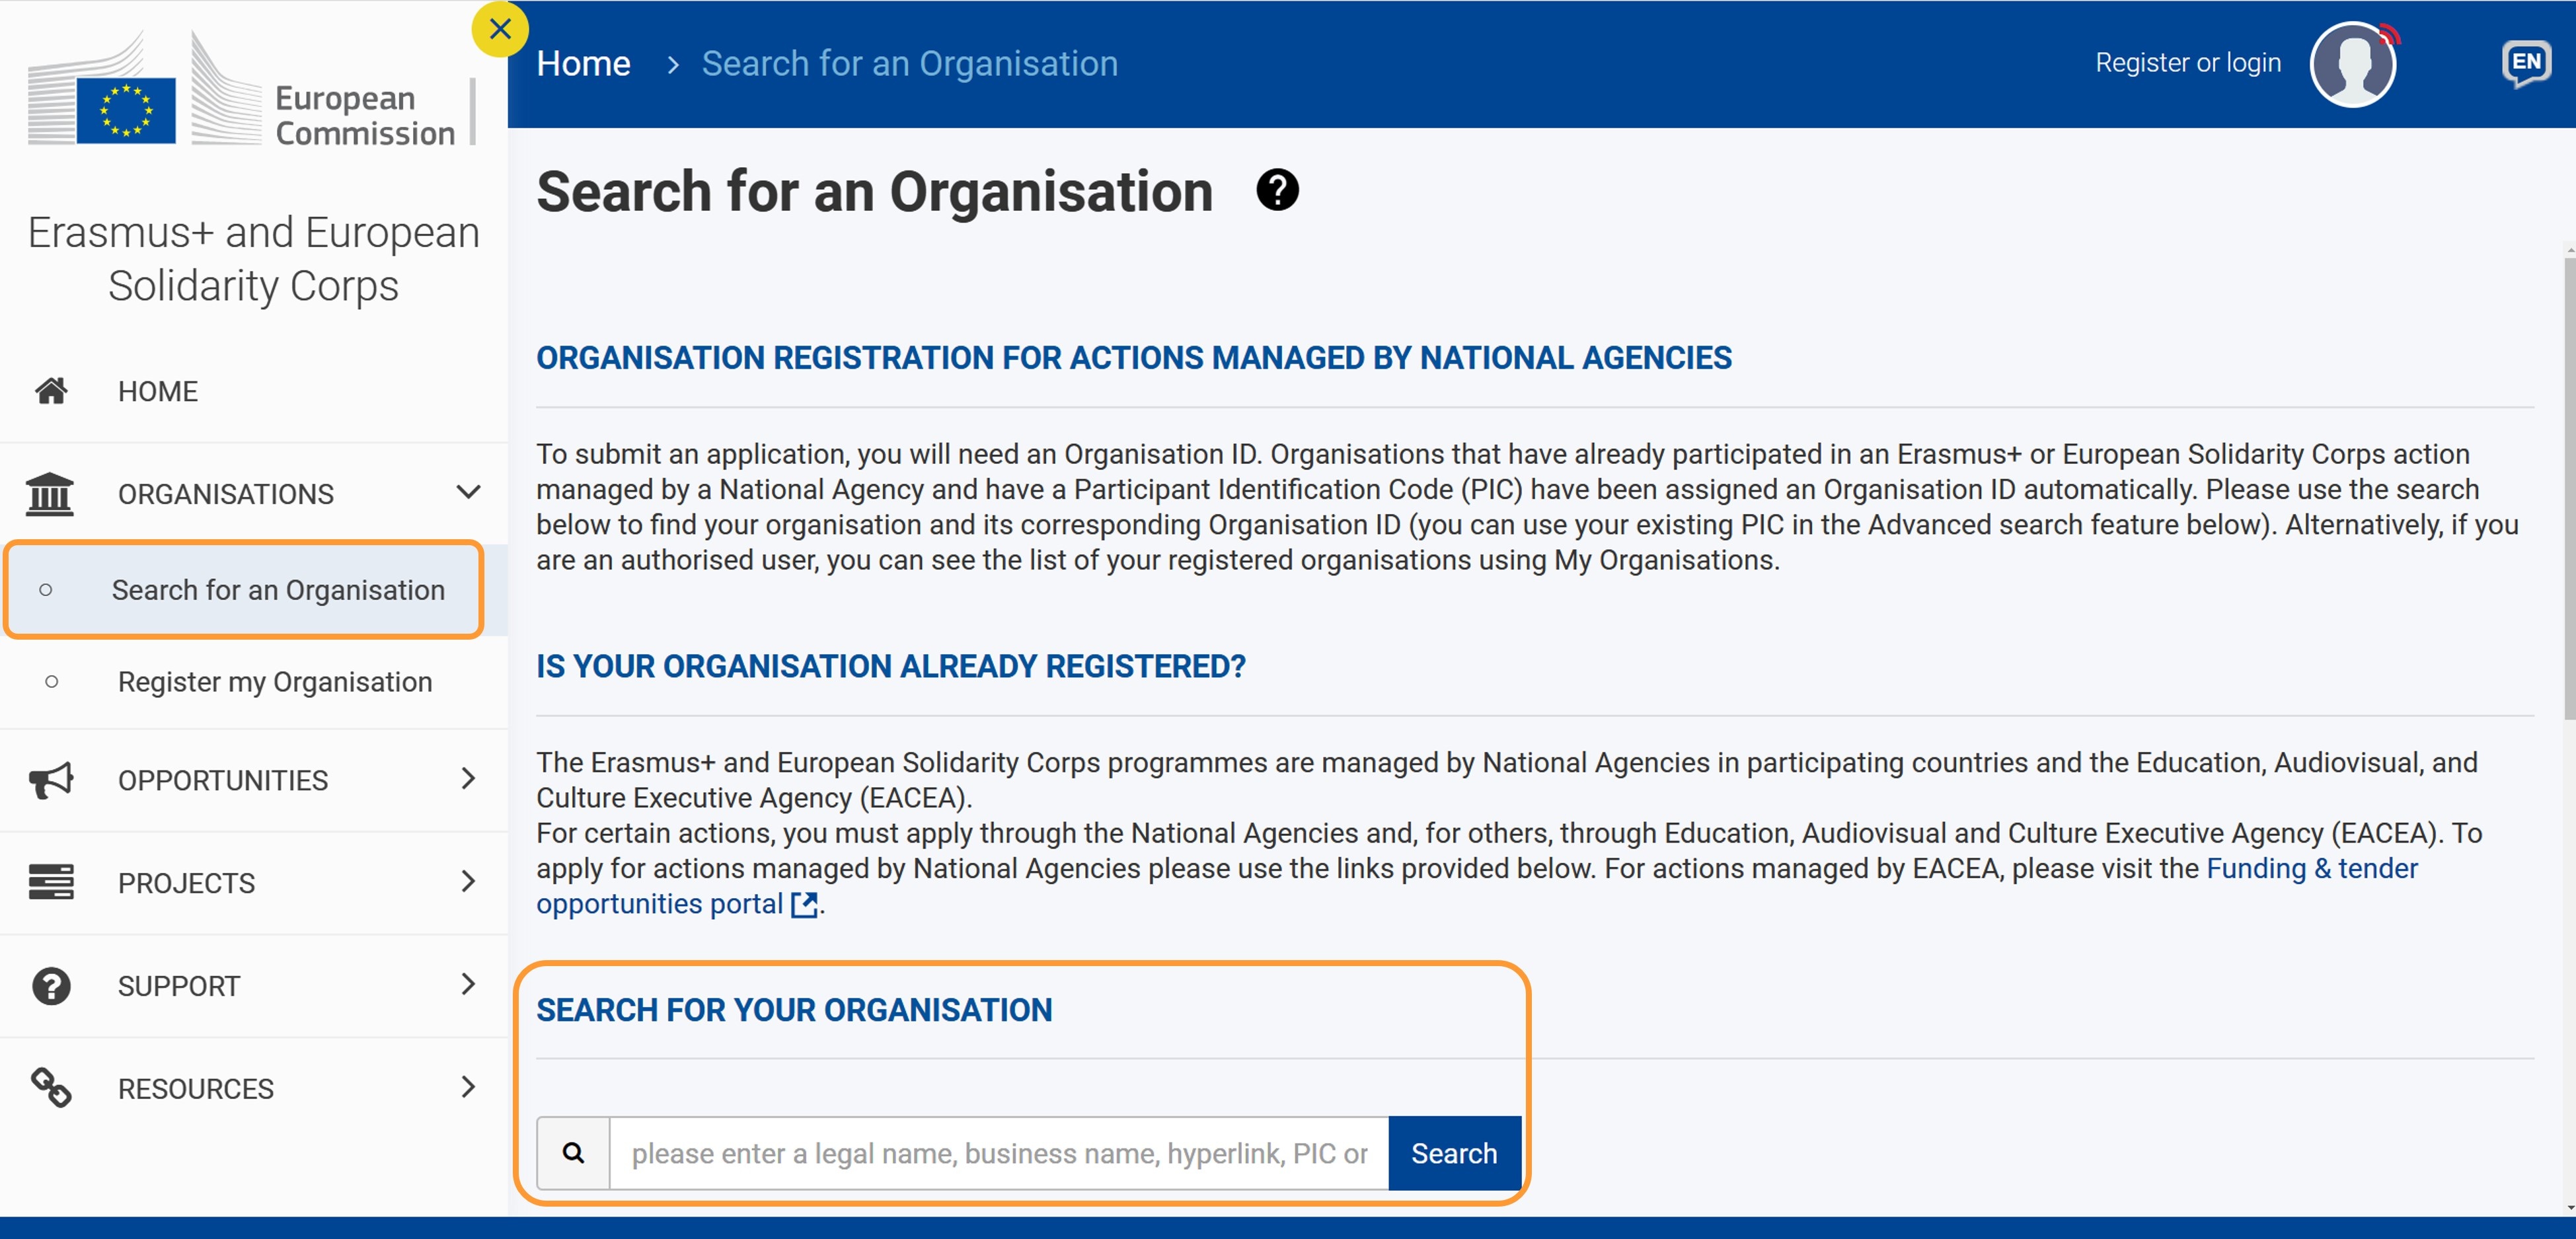 Open Search for an organisation screen